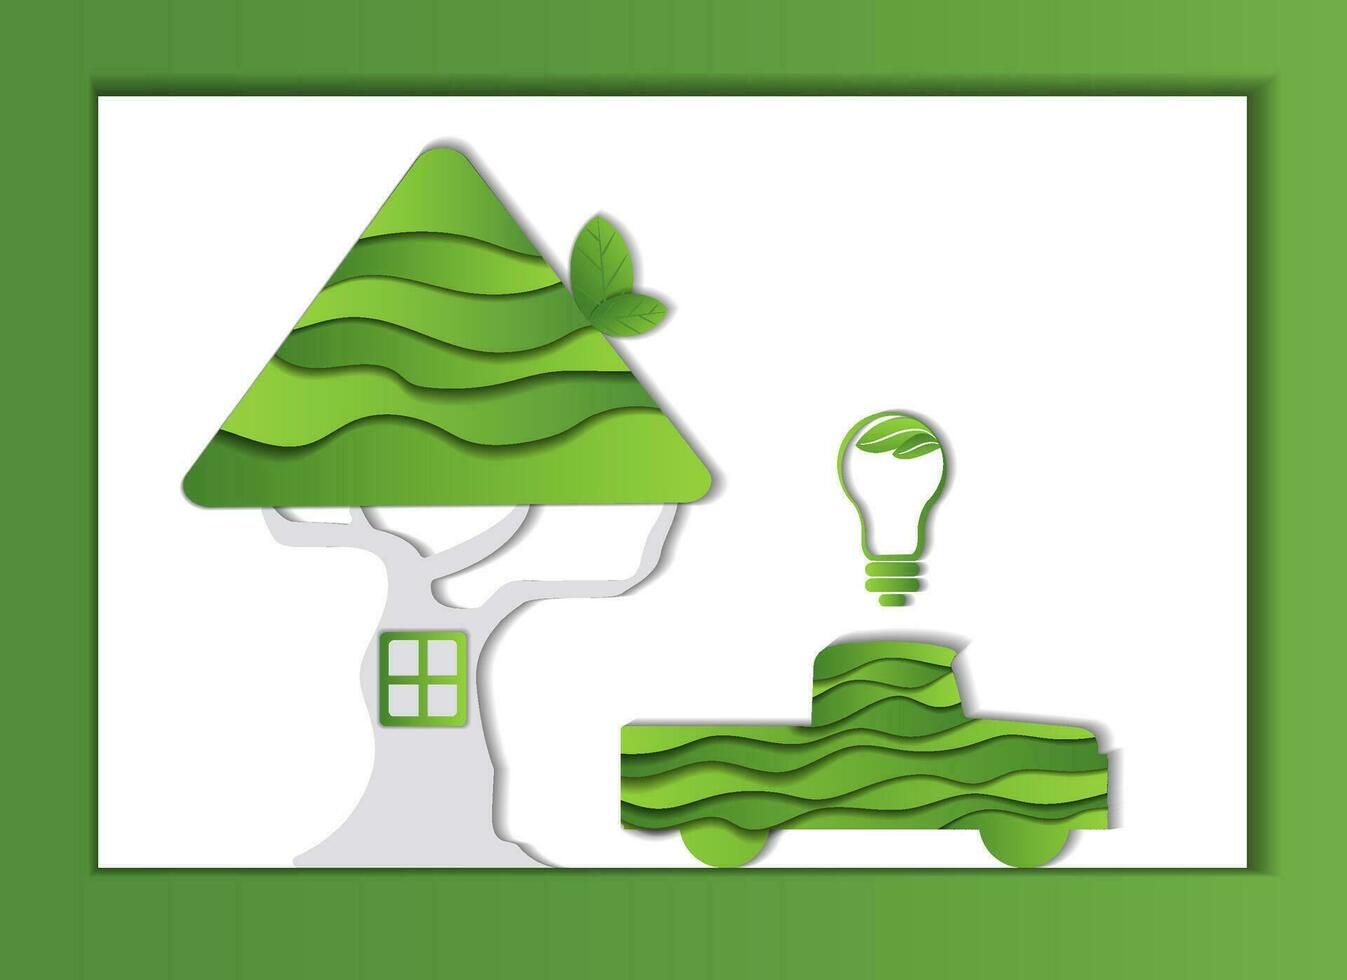 Paper cut house and electric car, green tree leaves inside, green house concept, green house, eco friendly, recycling concept, clean house. vector